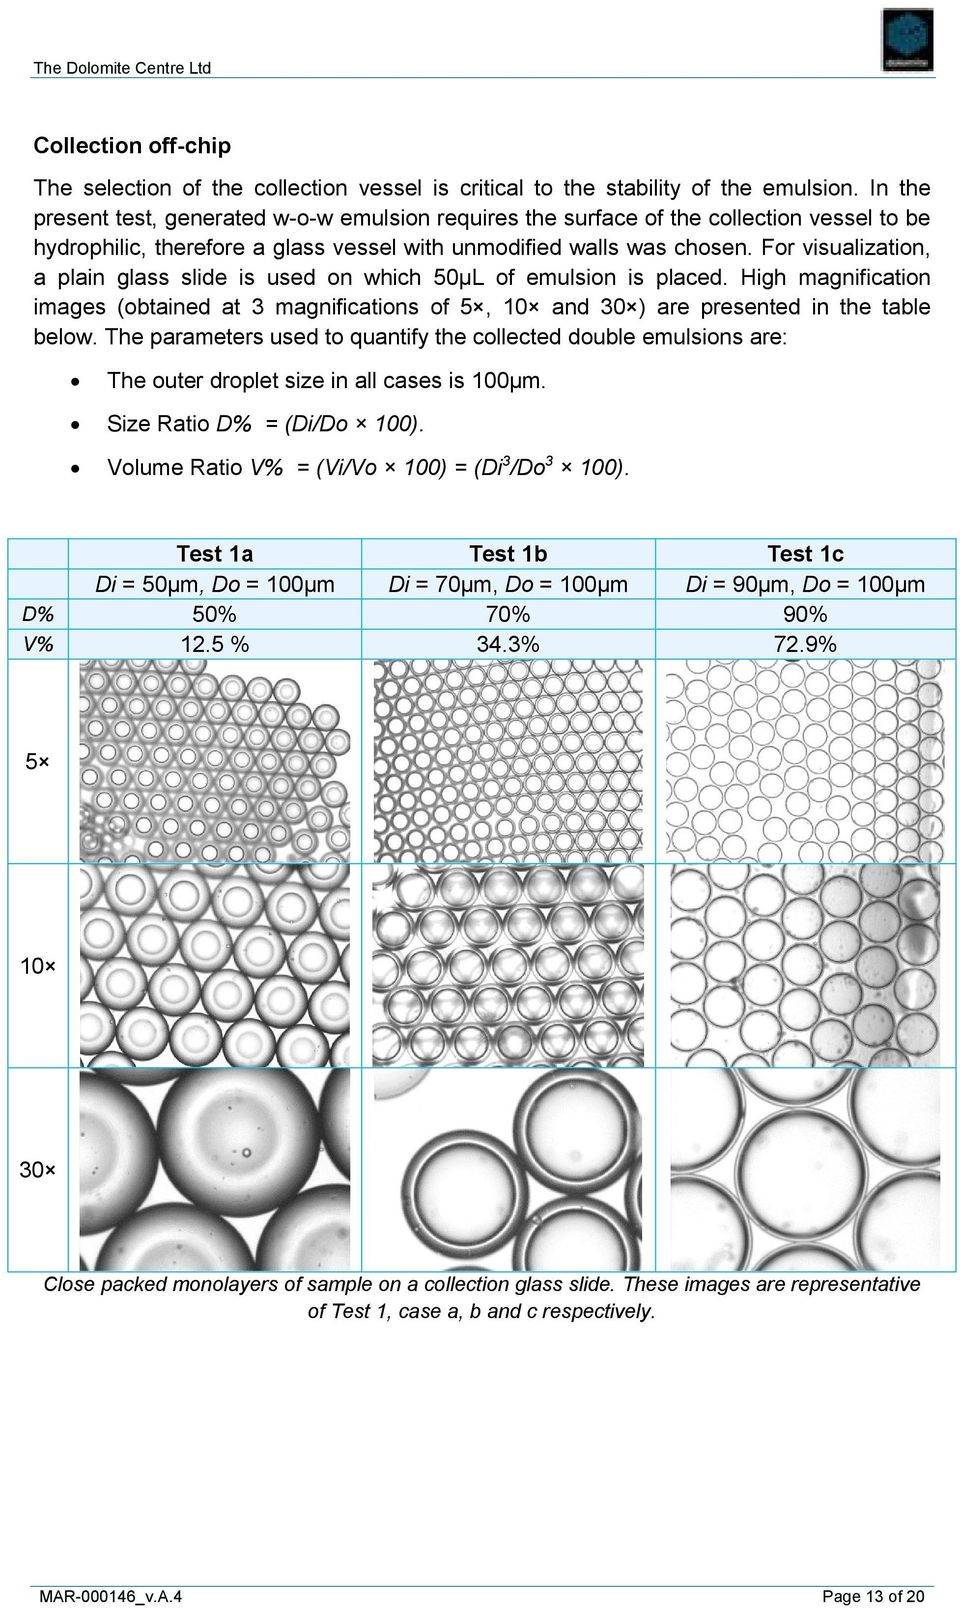 For visualization, a plain glass slide is used on which 50µL of emulsion is placed. High magnification images (obtained at 3 magnifications of 5, 10 and 30 ) are presented in the table below.